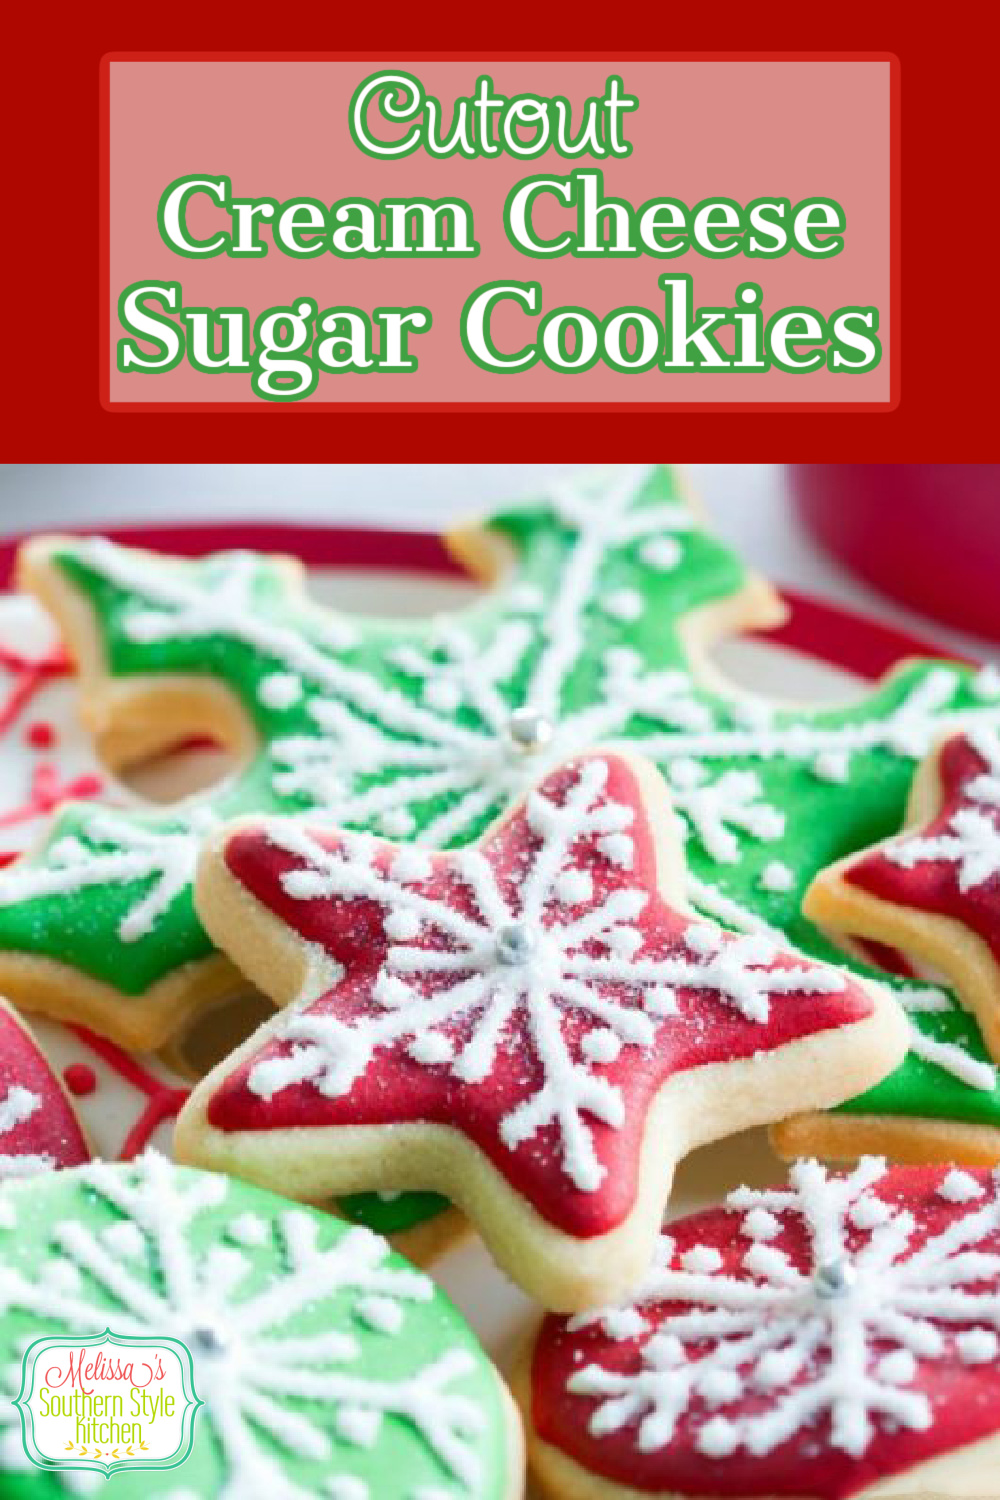 Add these Cutout Cream Cheese Sugar Cookies to your holiday baking plans #christmascookies #sugarcookies #bestsugarcookies #creamcheesecookies #cookierecipes #holidayrecipes #holidaybaking #creamcheesecookies #holidays #cookieswap #desserts #dessertfoodrecipes #southernrecipes #southernfood #melissassouthernstylekitchen